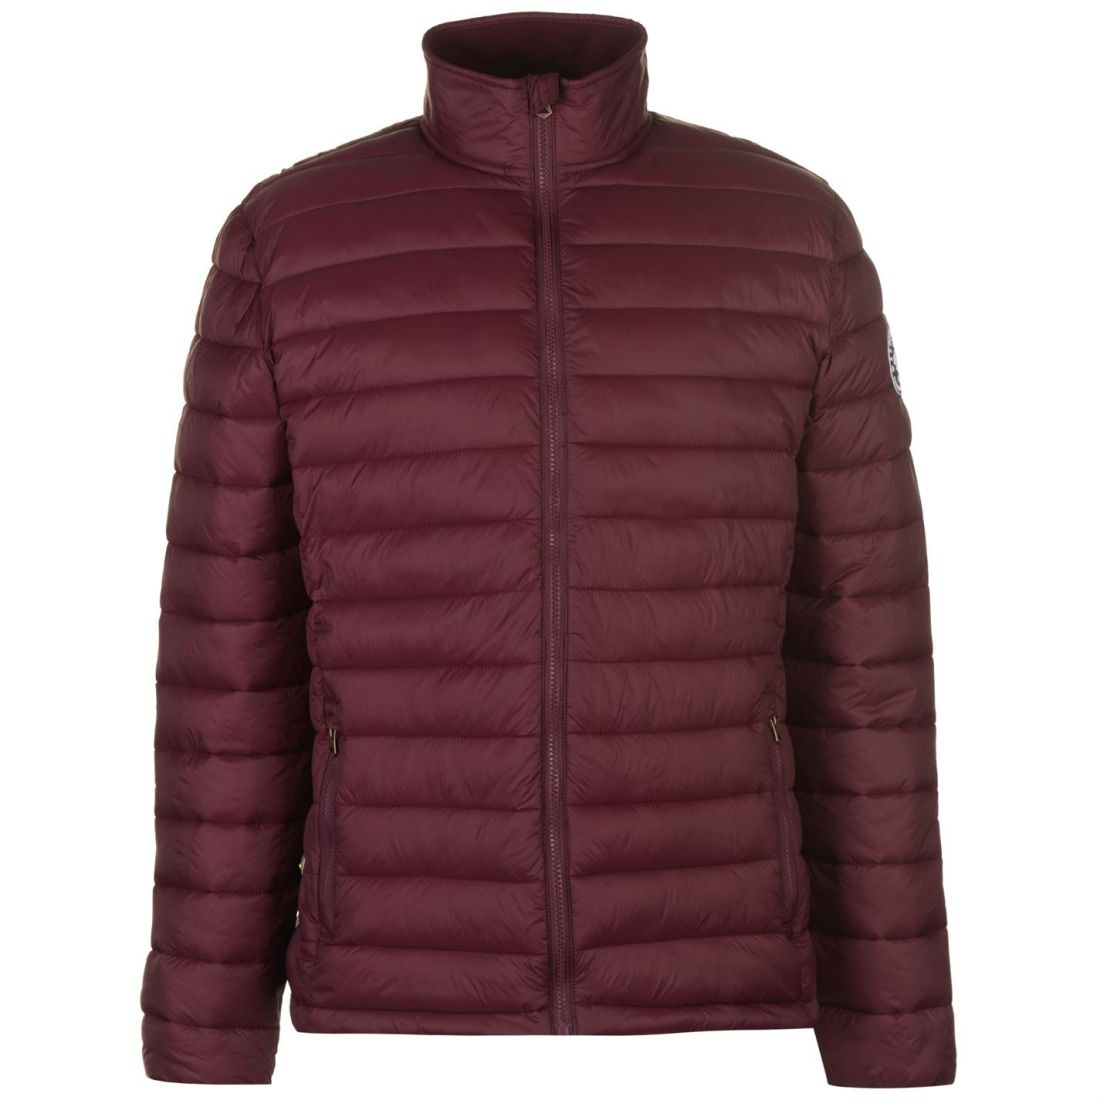 SoulCal Micro Bubble Jacket Mens Gents Padded Coat Top Full Length ...